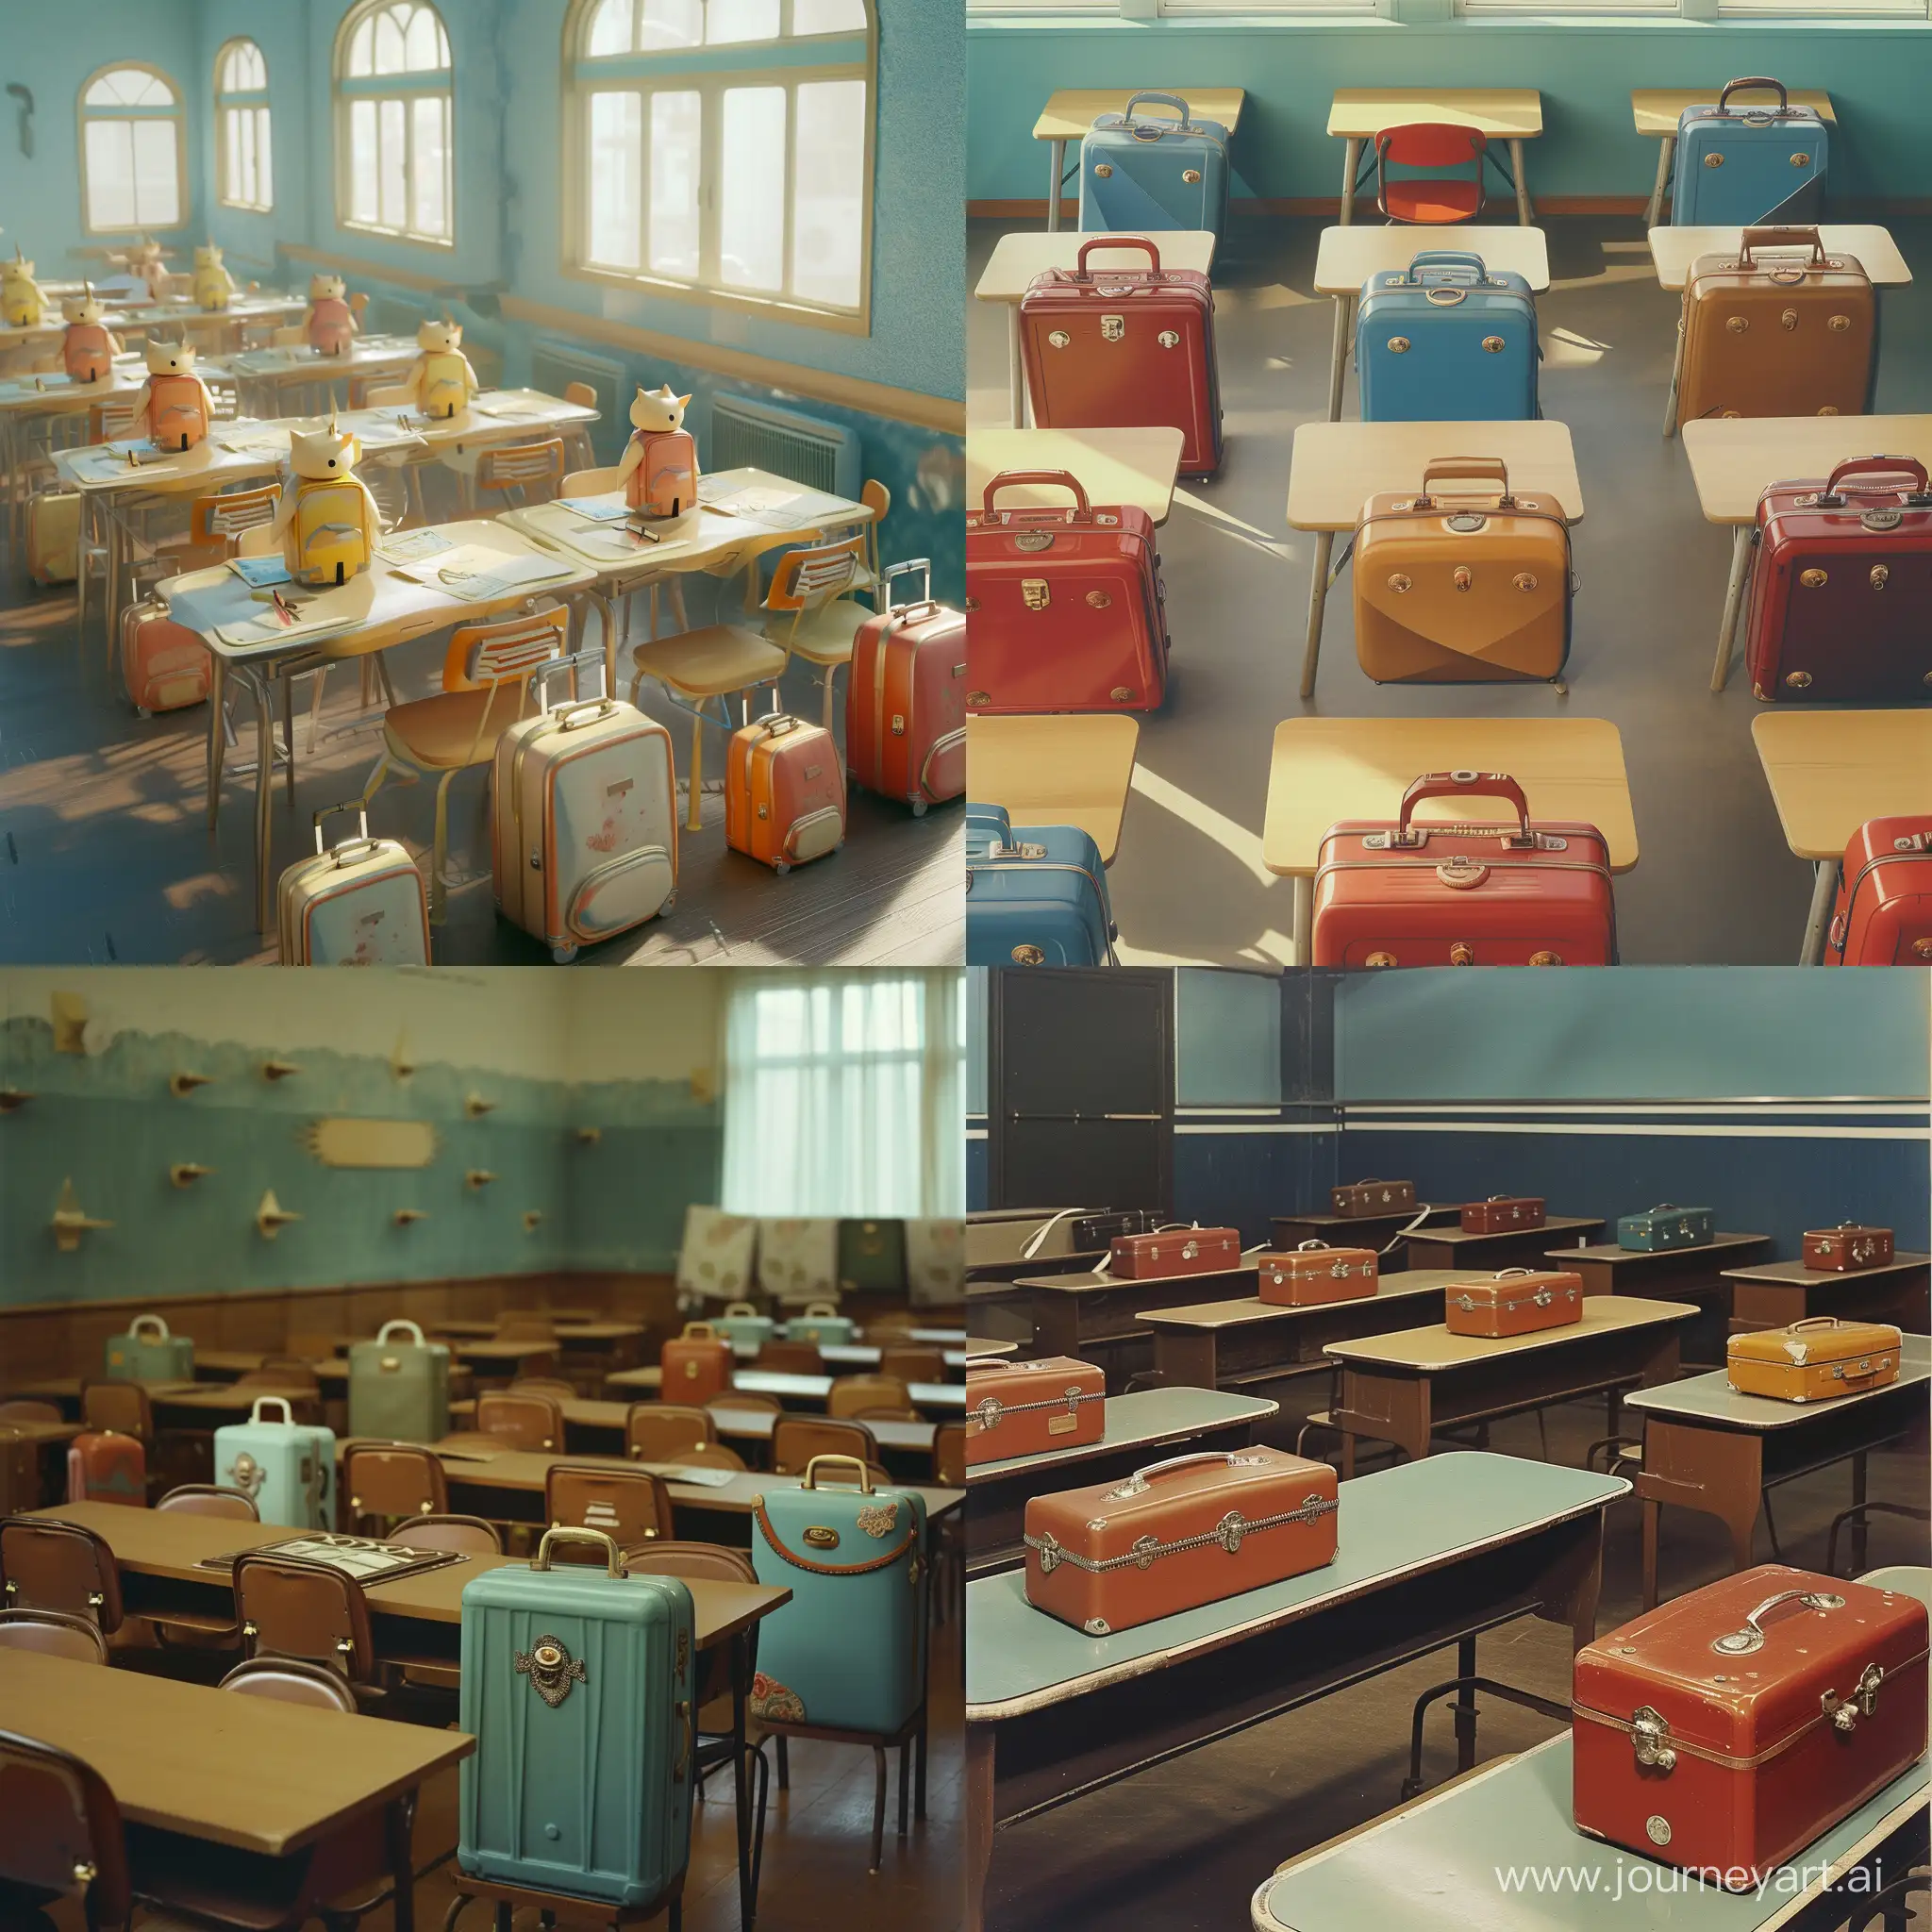 School class, anthropomorphic suitcases sitting at the tables